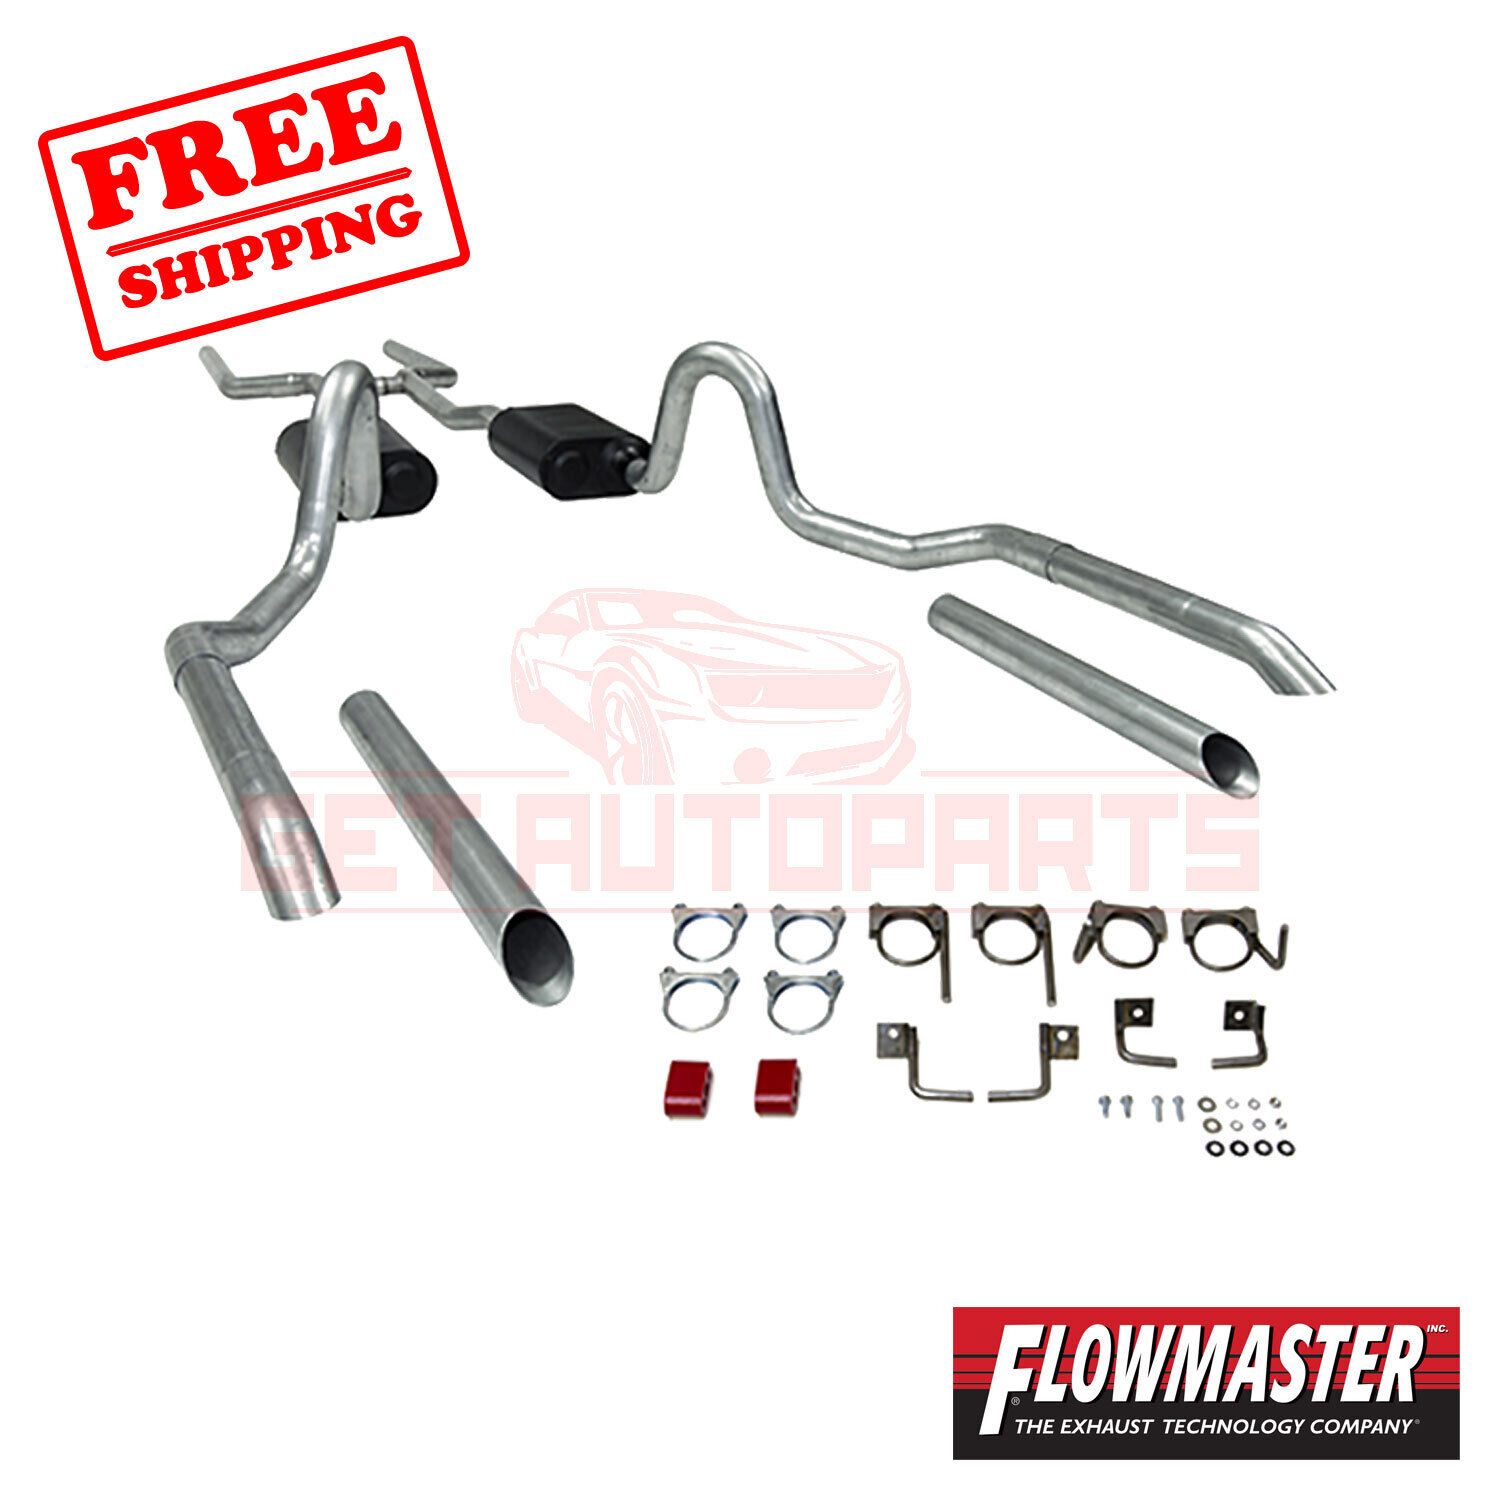 FlowMaster Exhaust System Kit for Buick GS 350 68-69